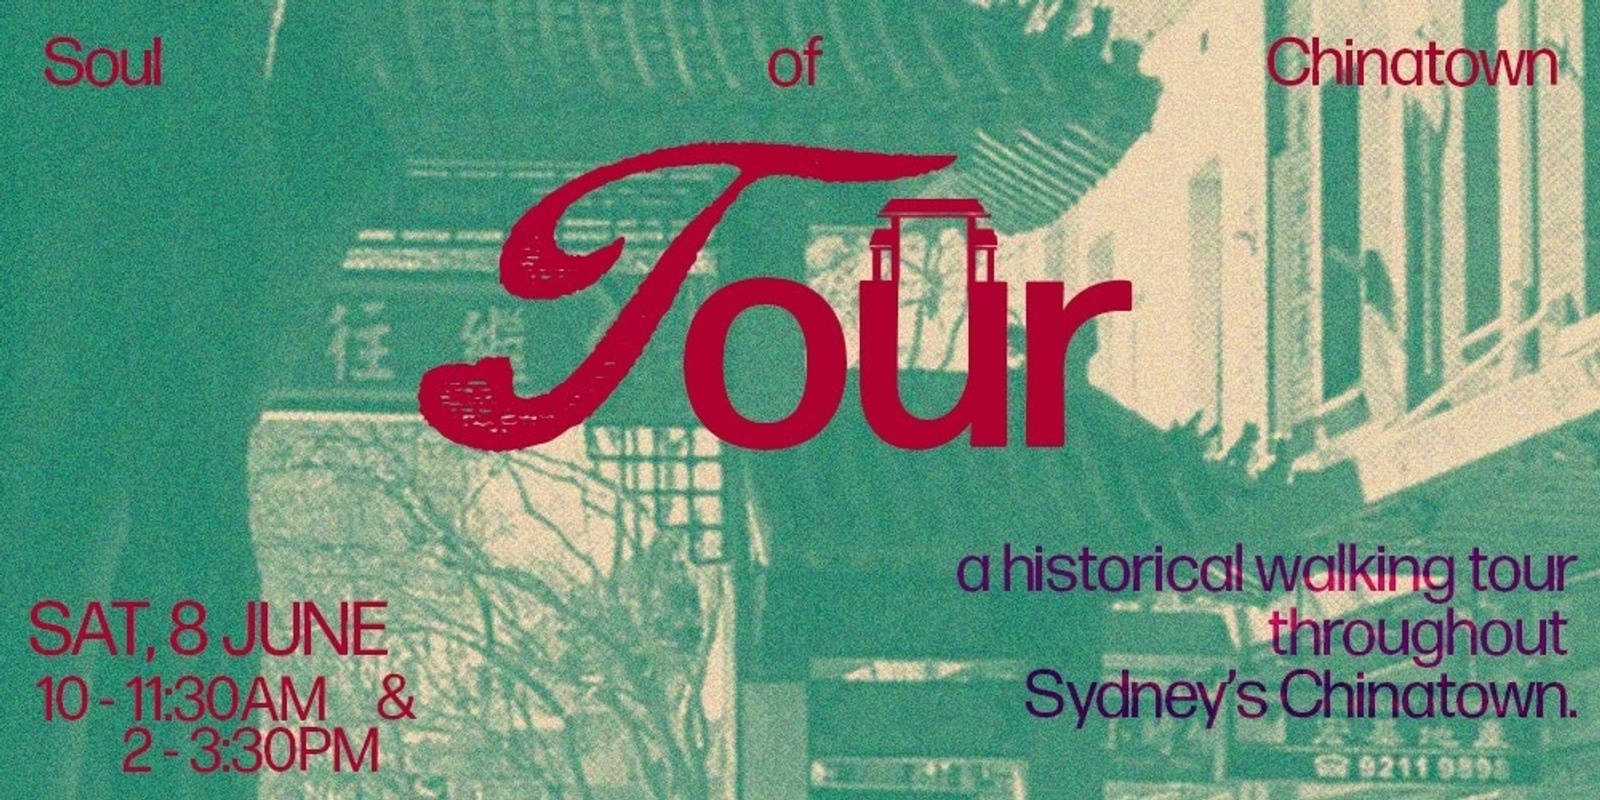 Banner image for Soul of Chinatown walking tour